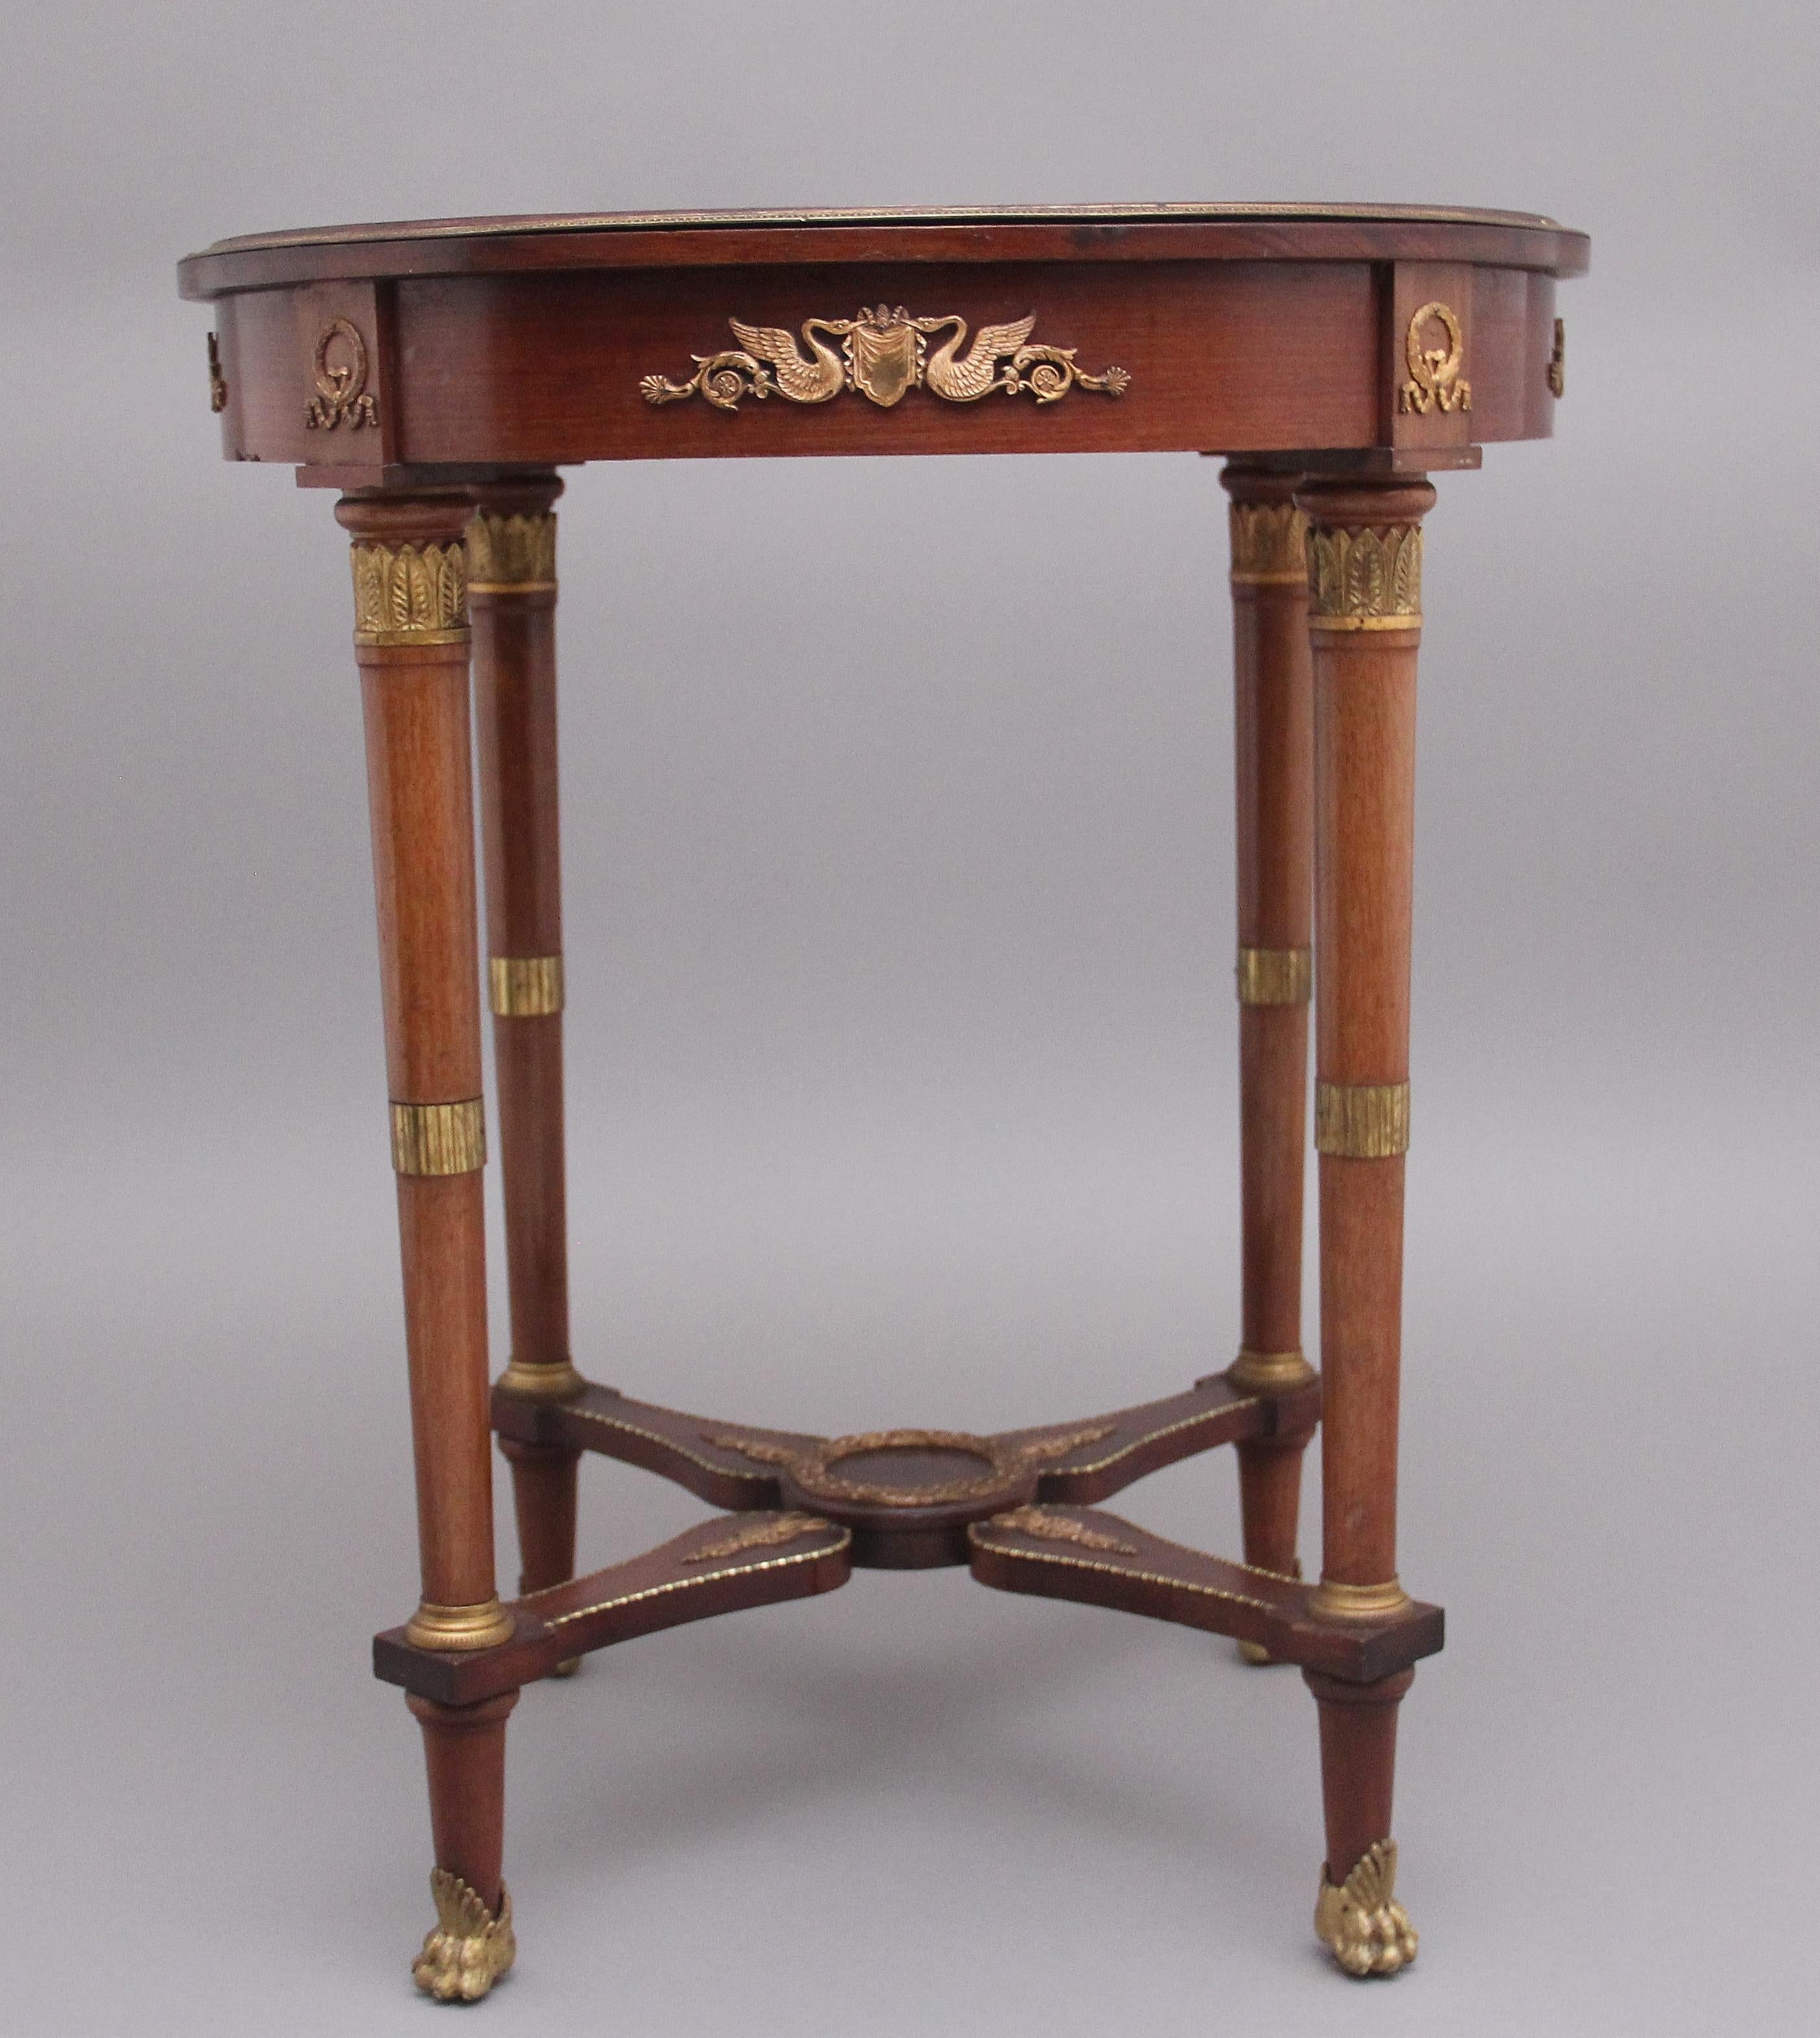 19th Century French mahogany centre table in the Empire style, having a wonderful decorative segmented top with engraved brass moulding, the frieze below having brass mounts along each section, supported on turned and tapered legs with further brass